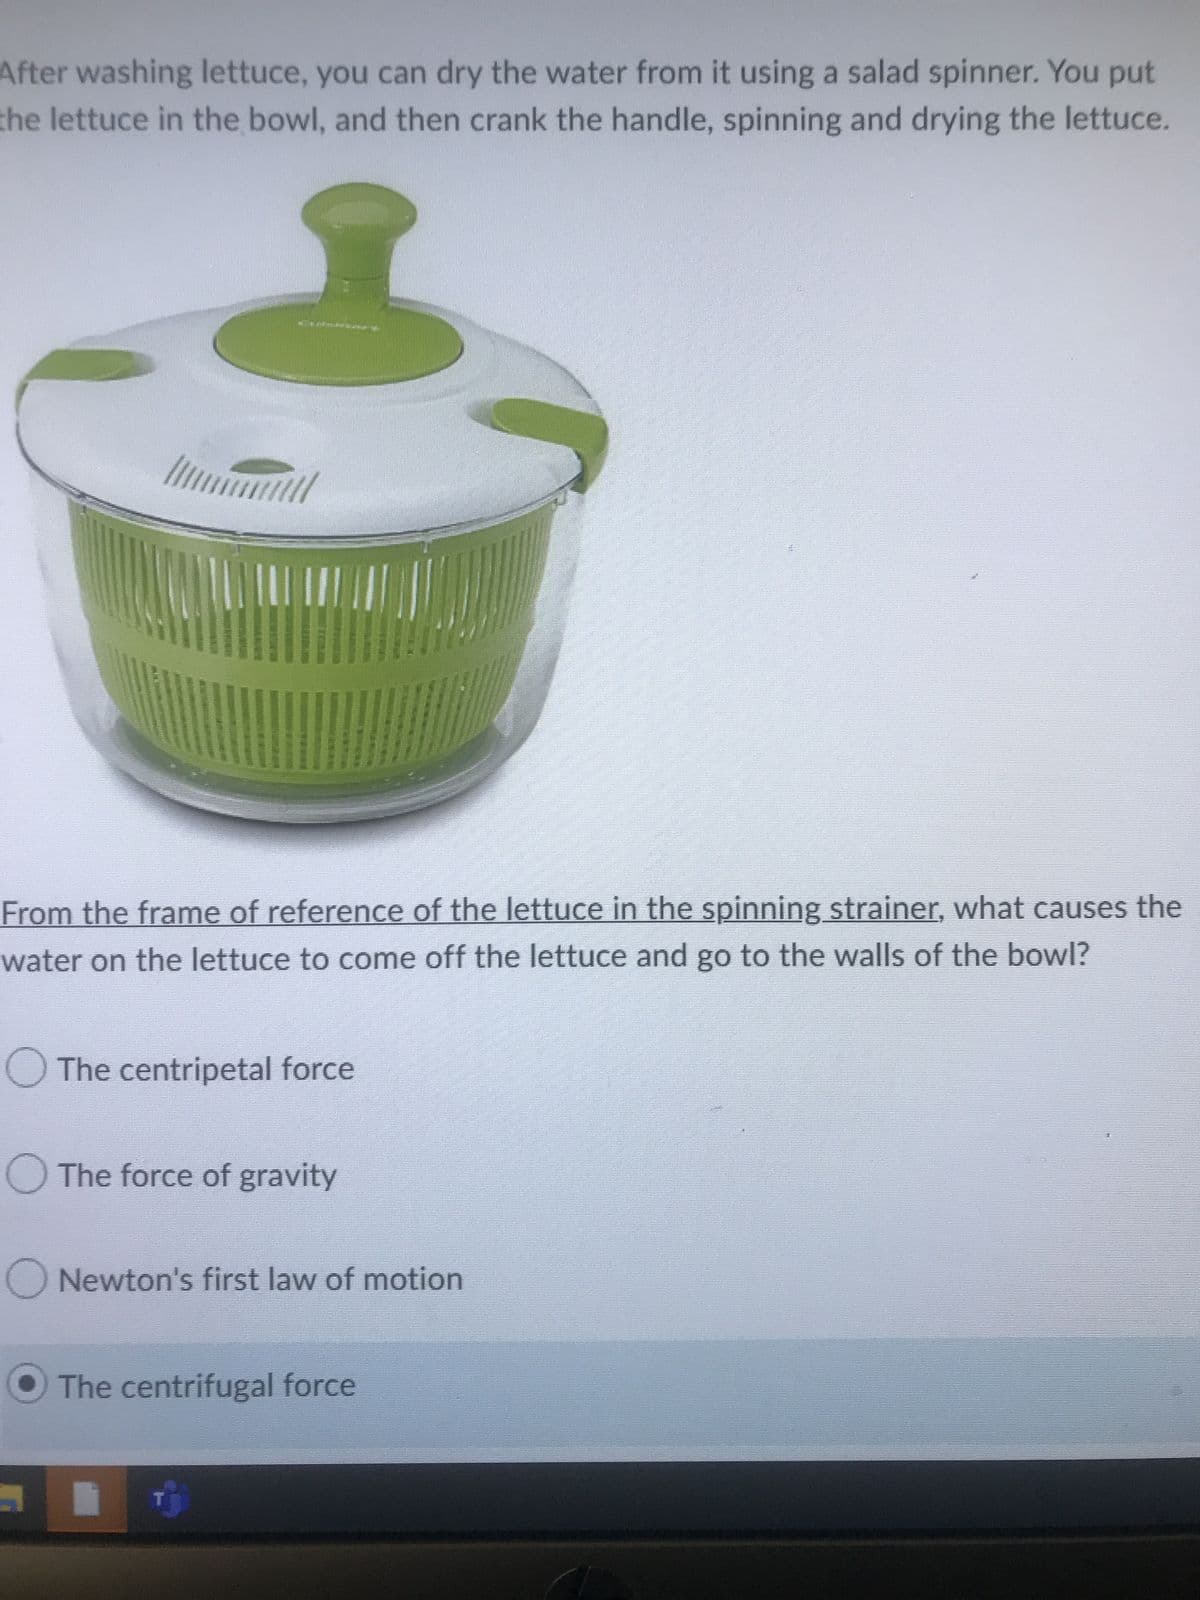 After washing lettuce, you can dry the water from it using a salad spinner. You put
the lettuce in the bowl, and then crank the handle, spinning and drying the lettuce.
///
**Alabanan it
Till
From the frame of reference of the lettuce in the spinning strainer, what causes the
water on the lettuce to come off the lettuce and go to the walls of the bowl?
The centripetal force
O The force of gravity
Newton's first law of motion
The centrifugal force